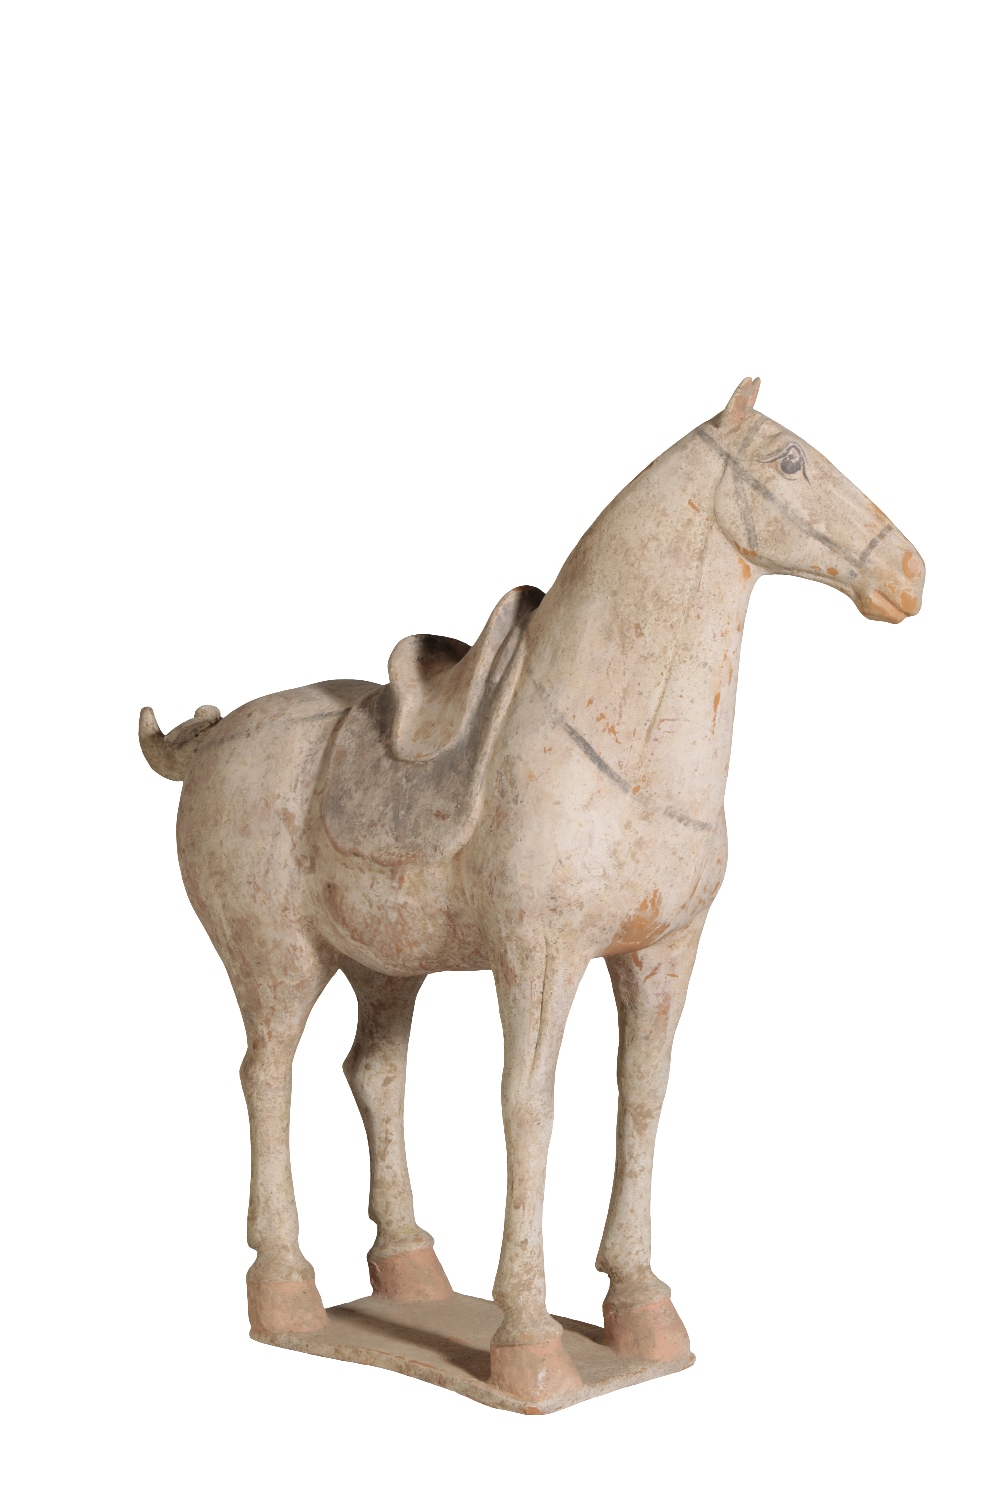 PAINTED POTTERY FIGURE OF A HORSE, TANG DYNASTY - Image 2 of 5